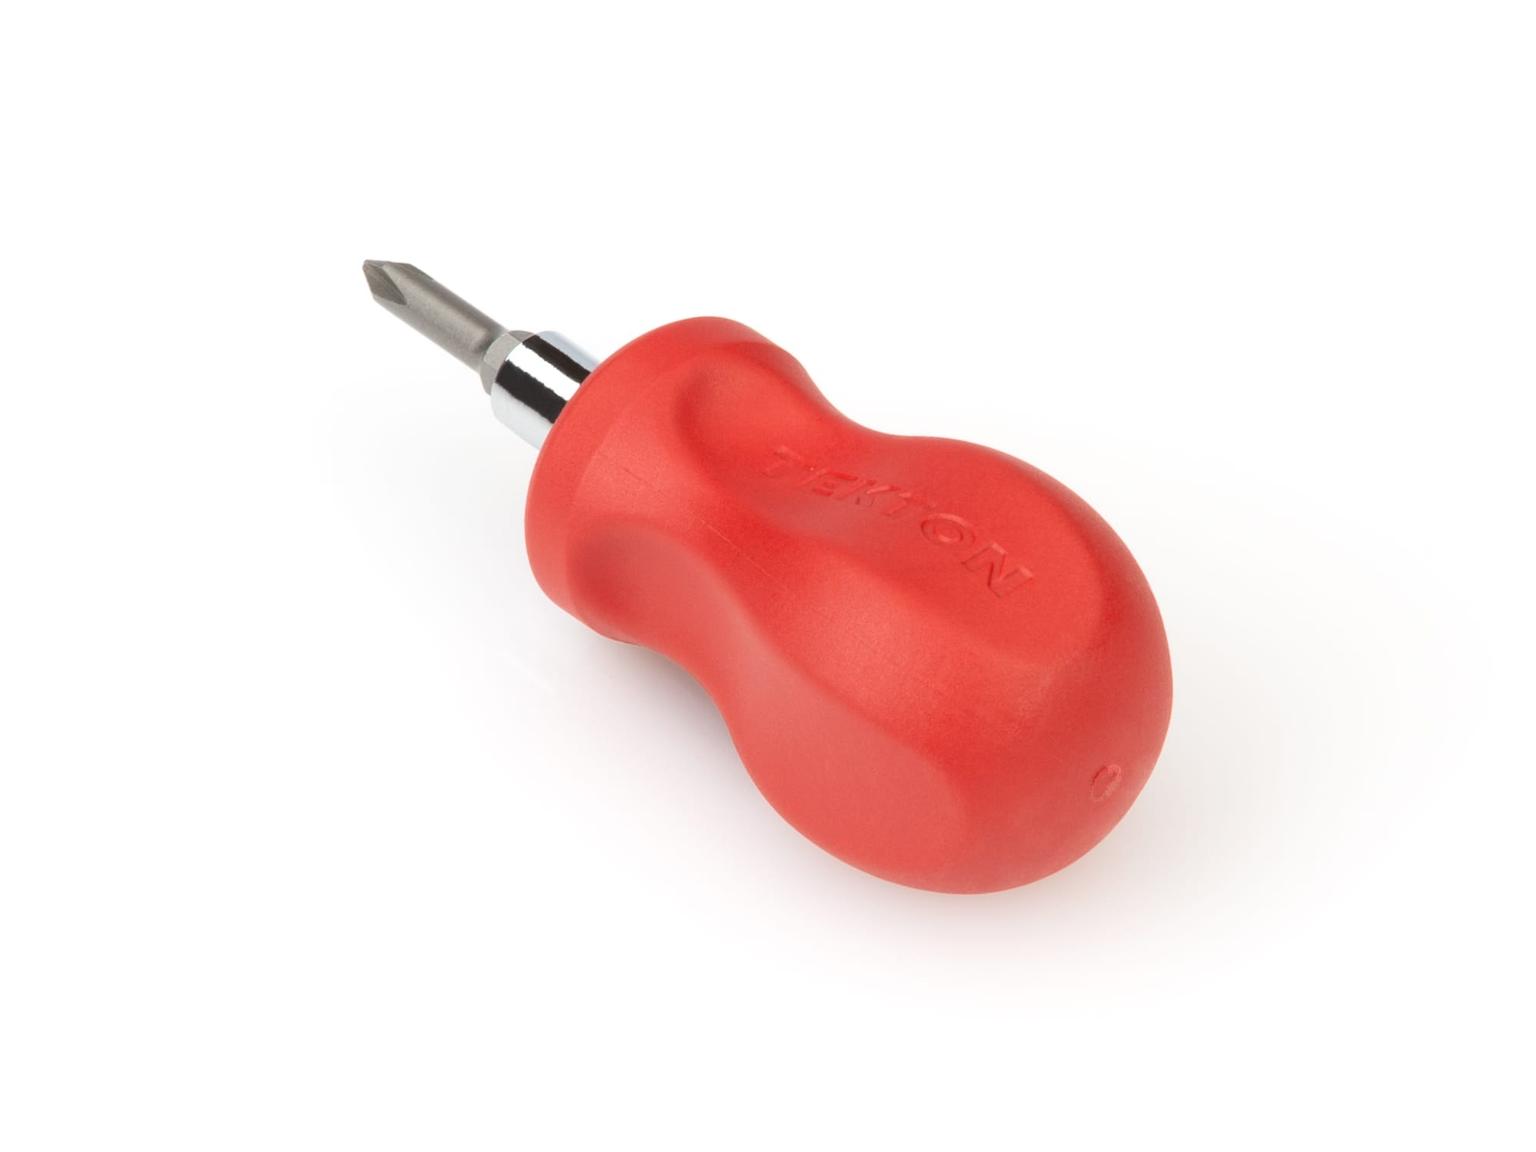 TEKTON DMT17001-T 3-in-1 Stubby Phillips/Slotted Driver (#1 x 3/16 in., Red)